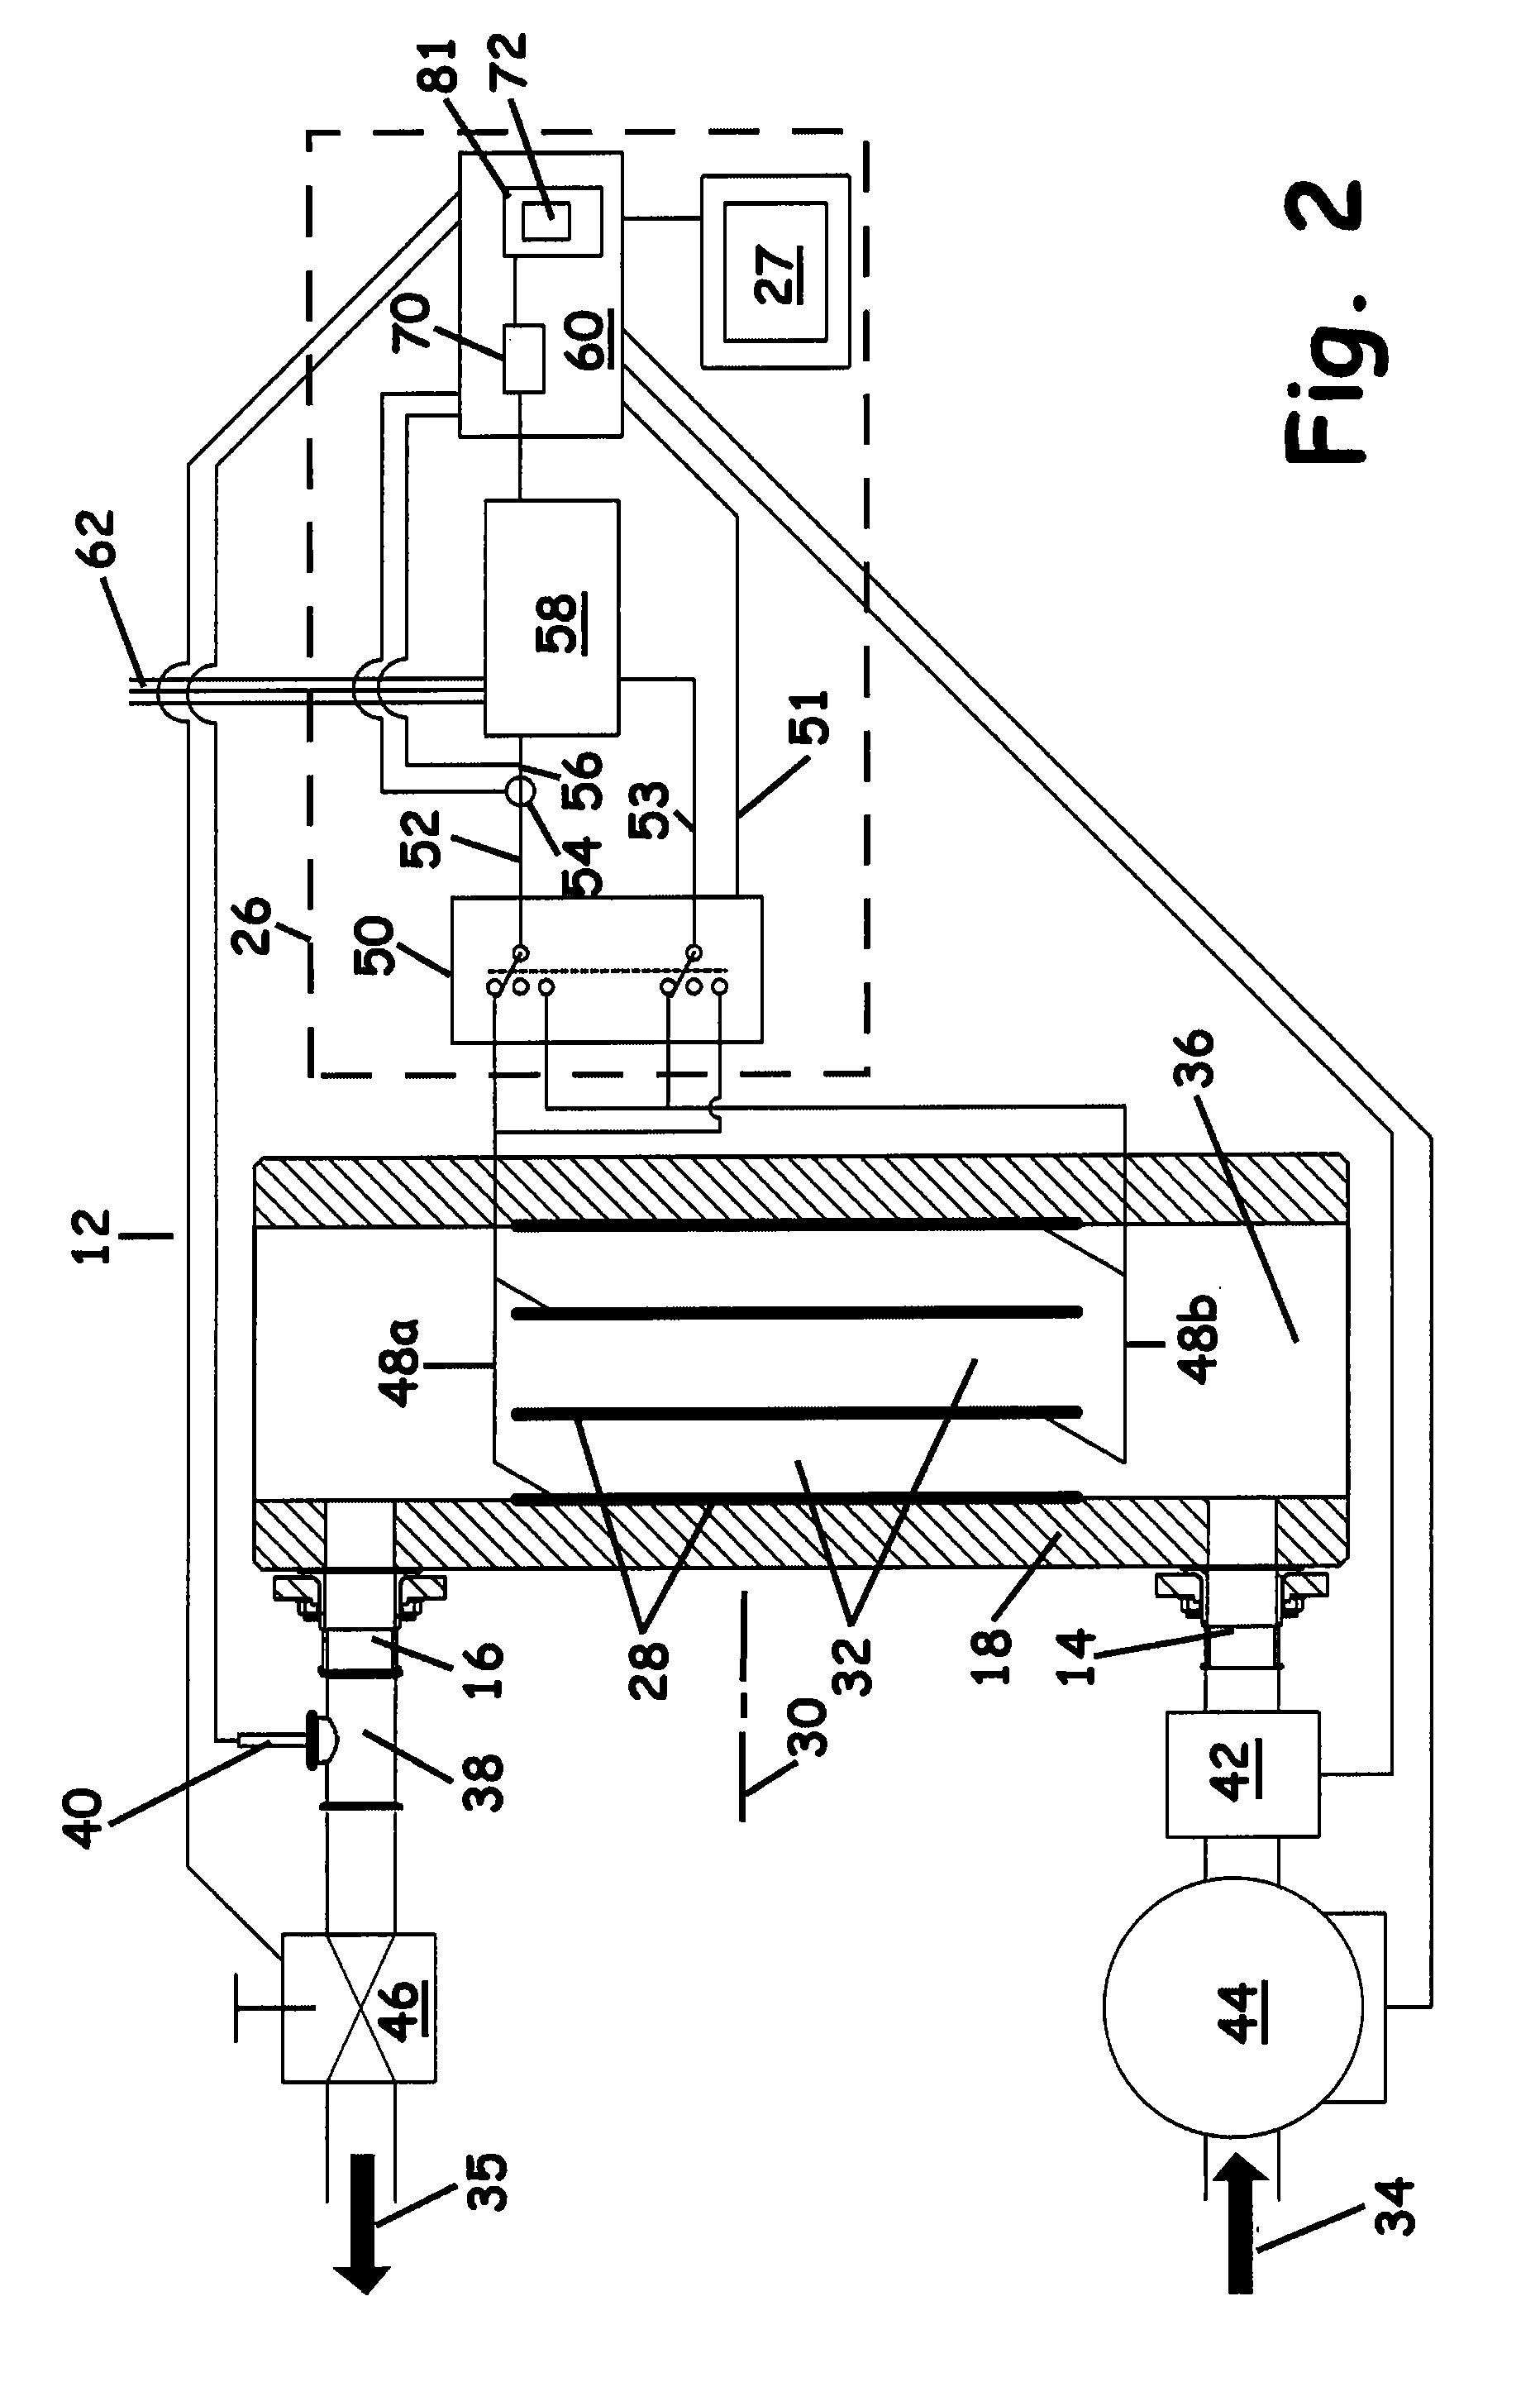 Electrochemical Liquid Treatment Cell with Modular Construction